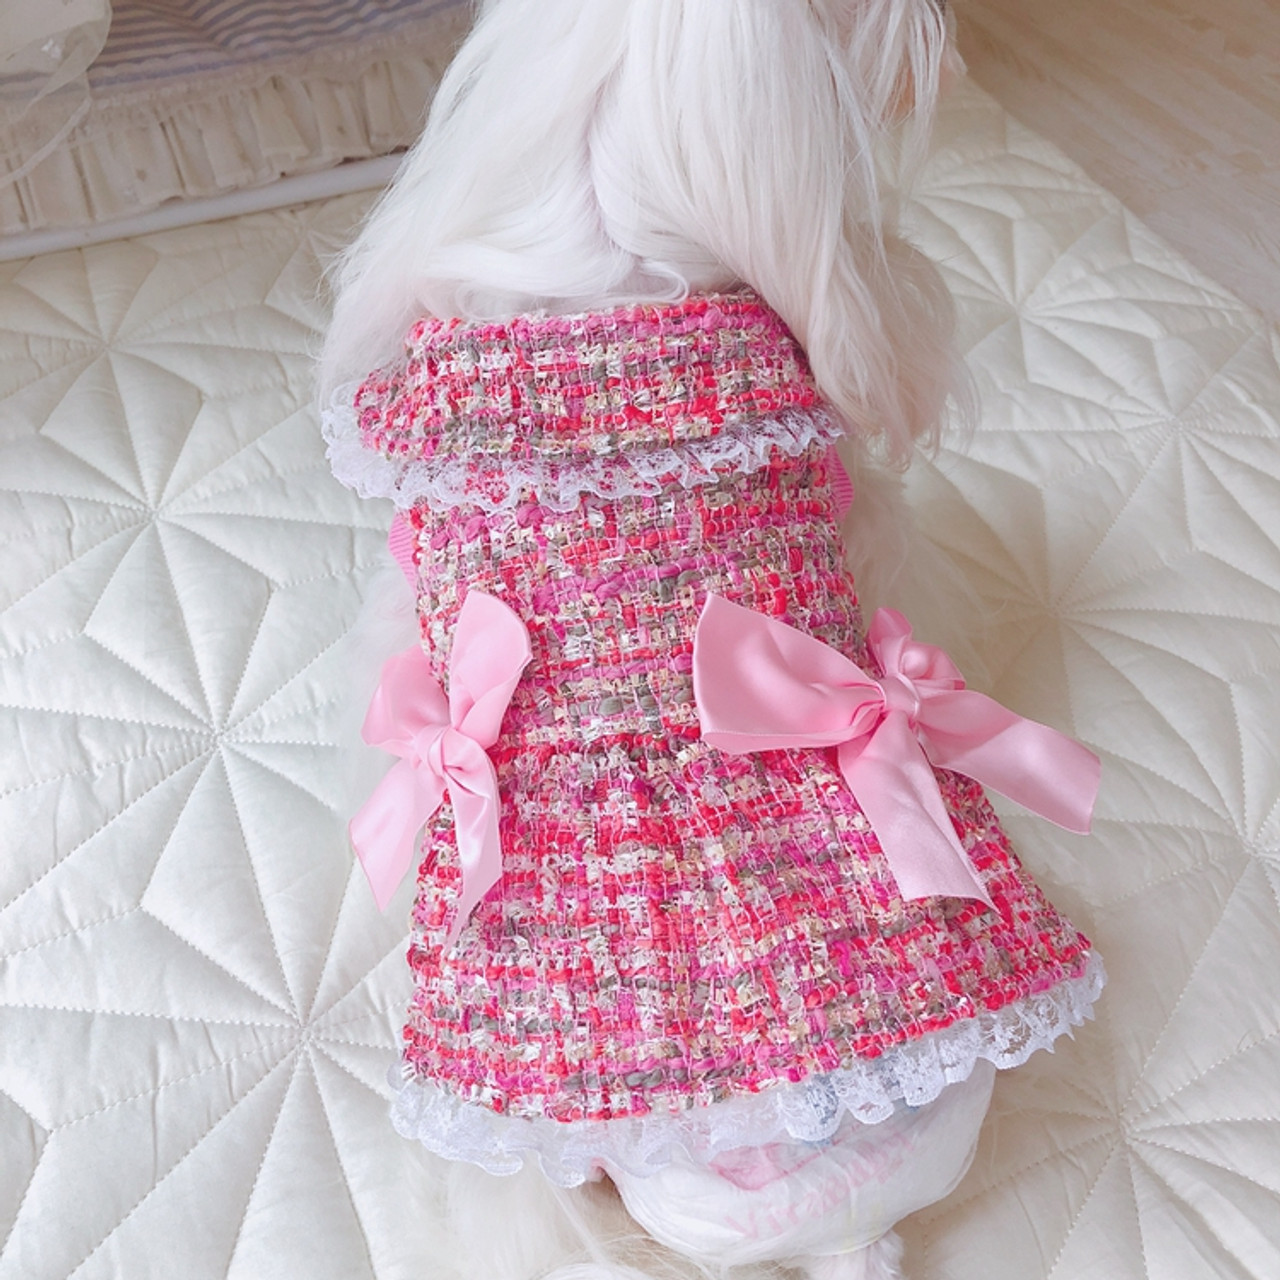 Chanel Style Dress Pet Dog Clothes Spring And Summer Teddy Dress Skirt